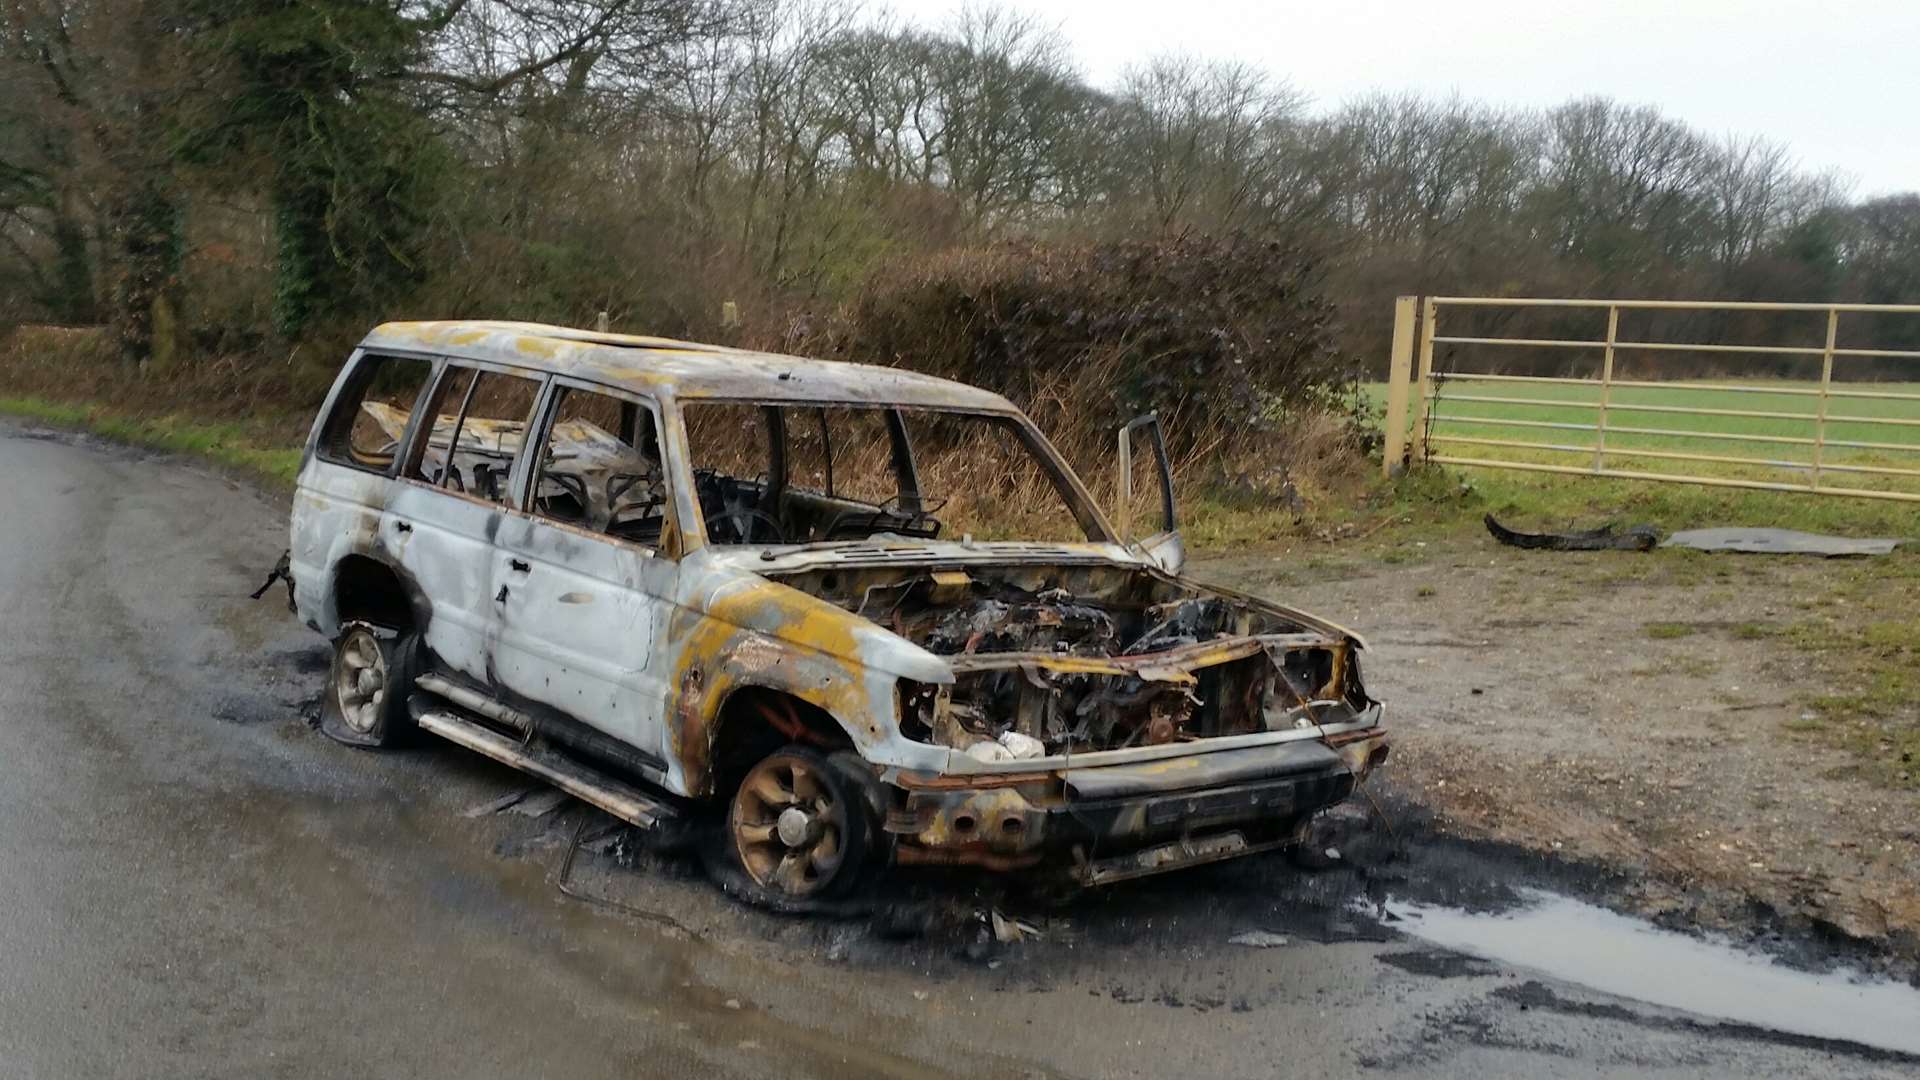 The burnt-out vehicle after the ram raid